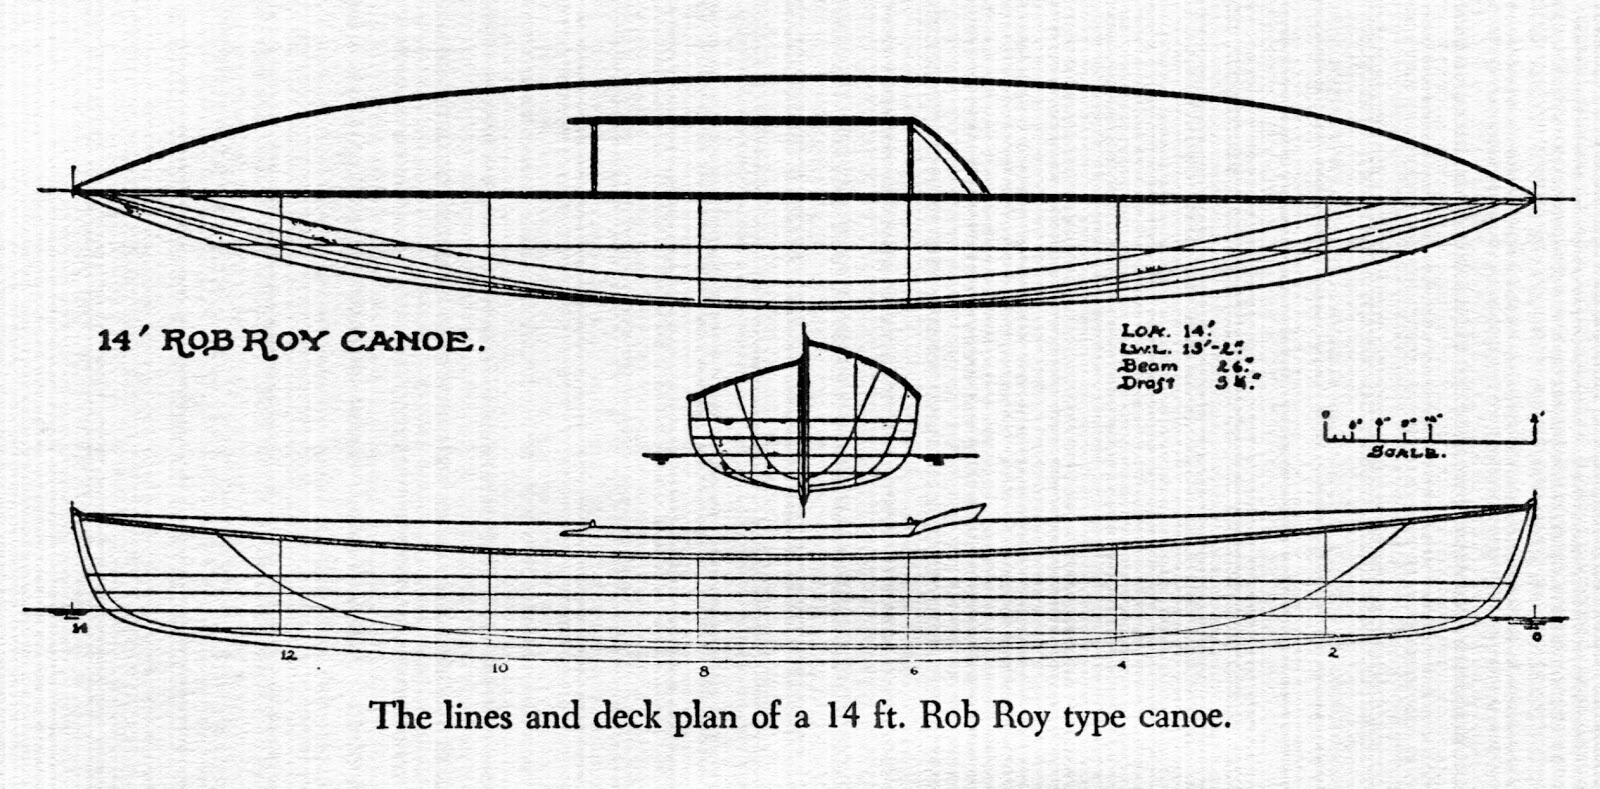  of having a sailing canoe with lines similar to the Herreshoff boat